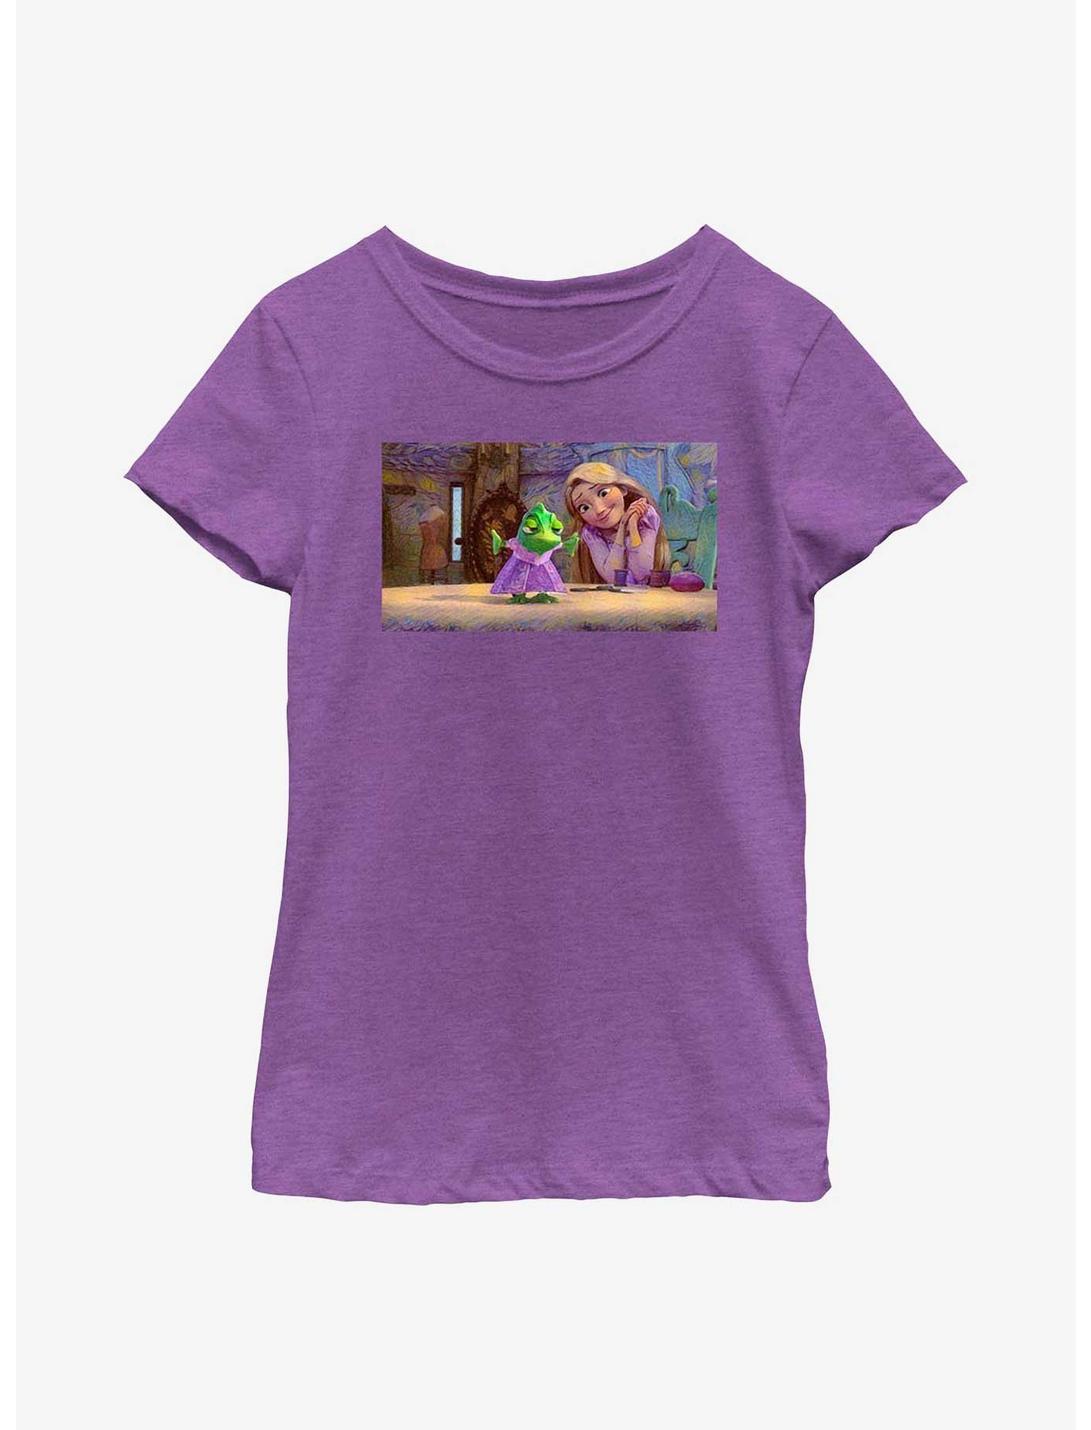 Disney Tangled Pascal Dressed Mood Youth Girls T-Shirt, PURPLE BERRY, hi-res